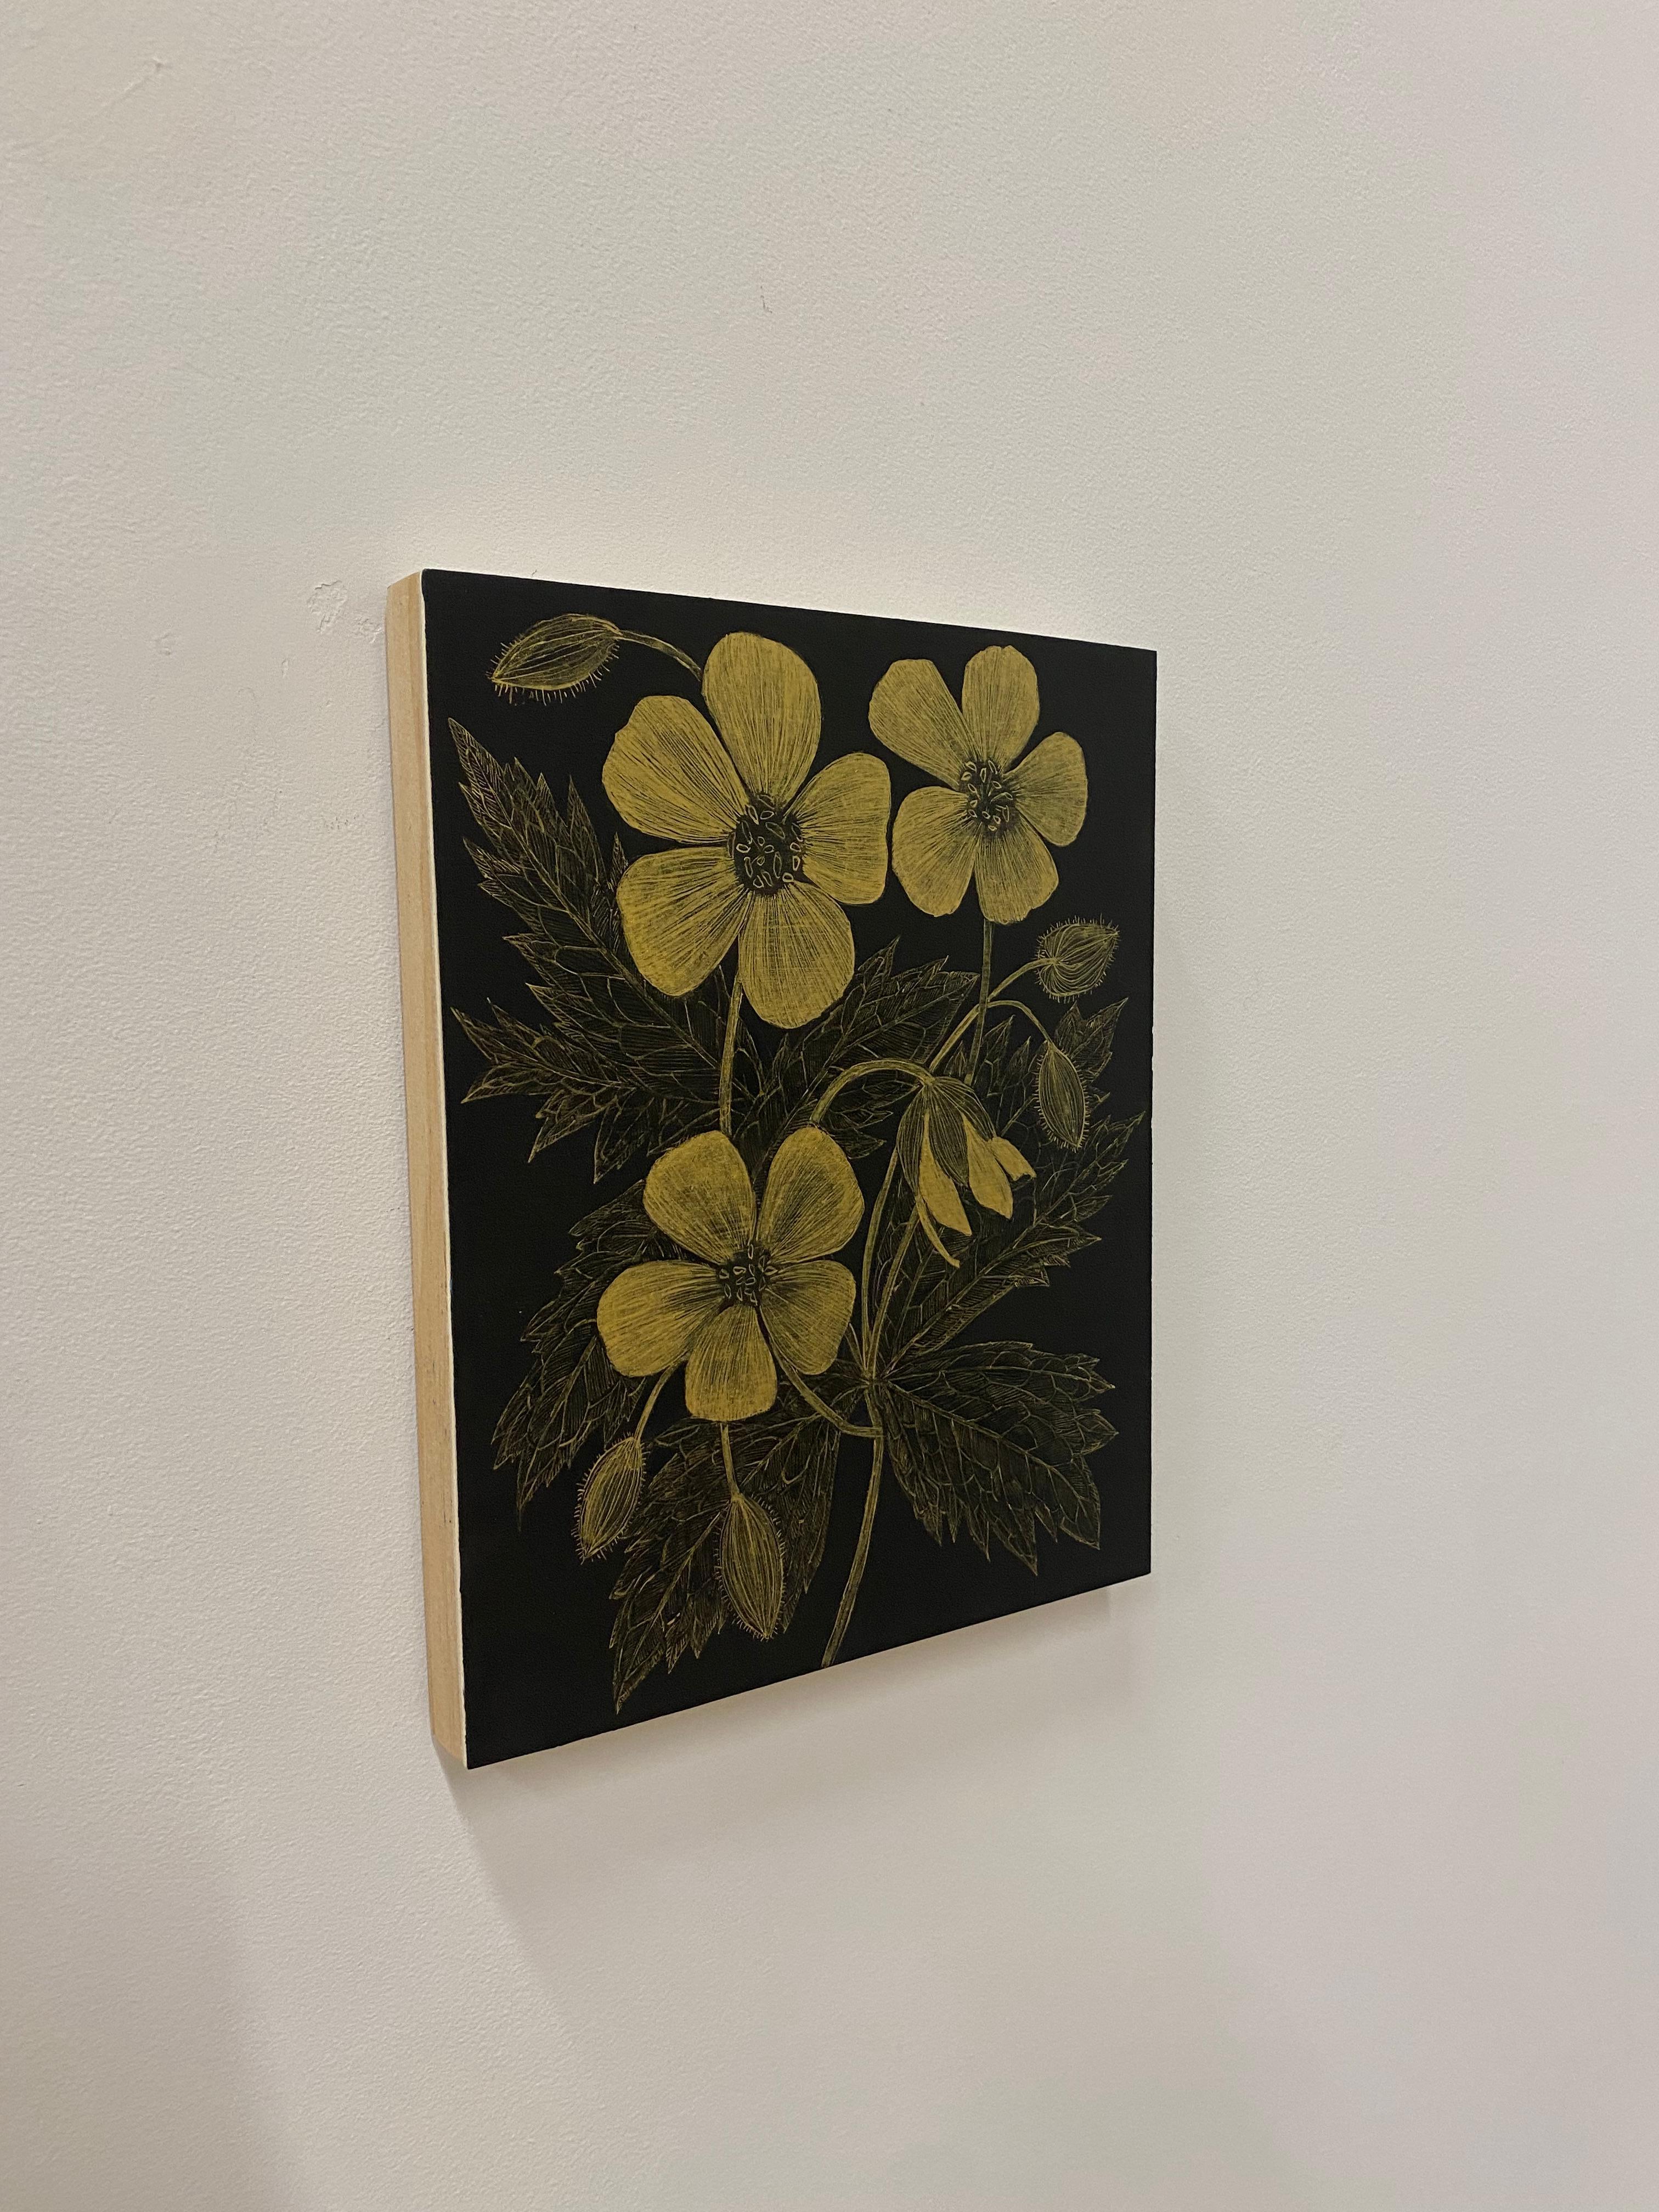 Wild Geranium Two, Botanical Painting Black Panel, Gold Flowers, Leaves, Stem For Sale 9